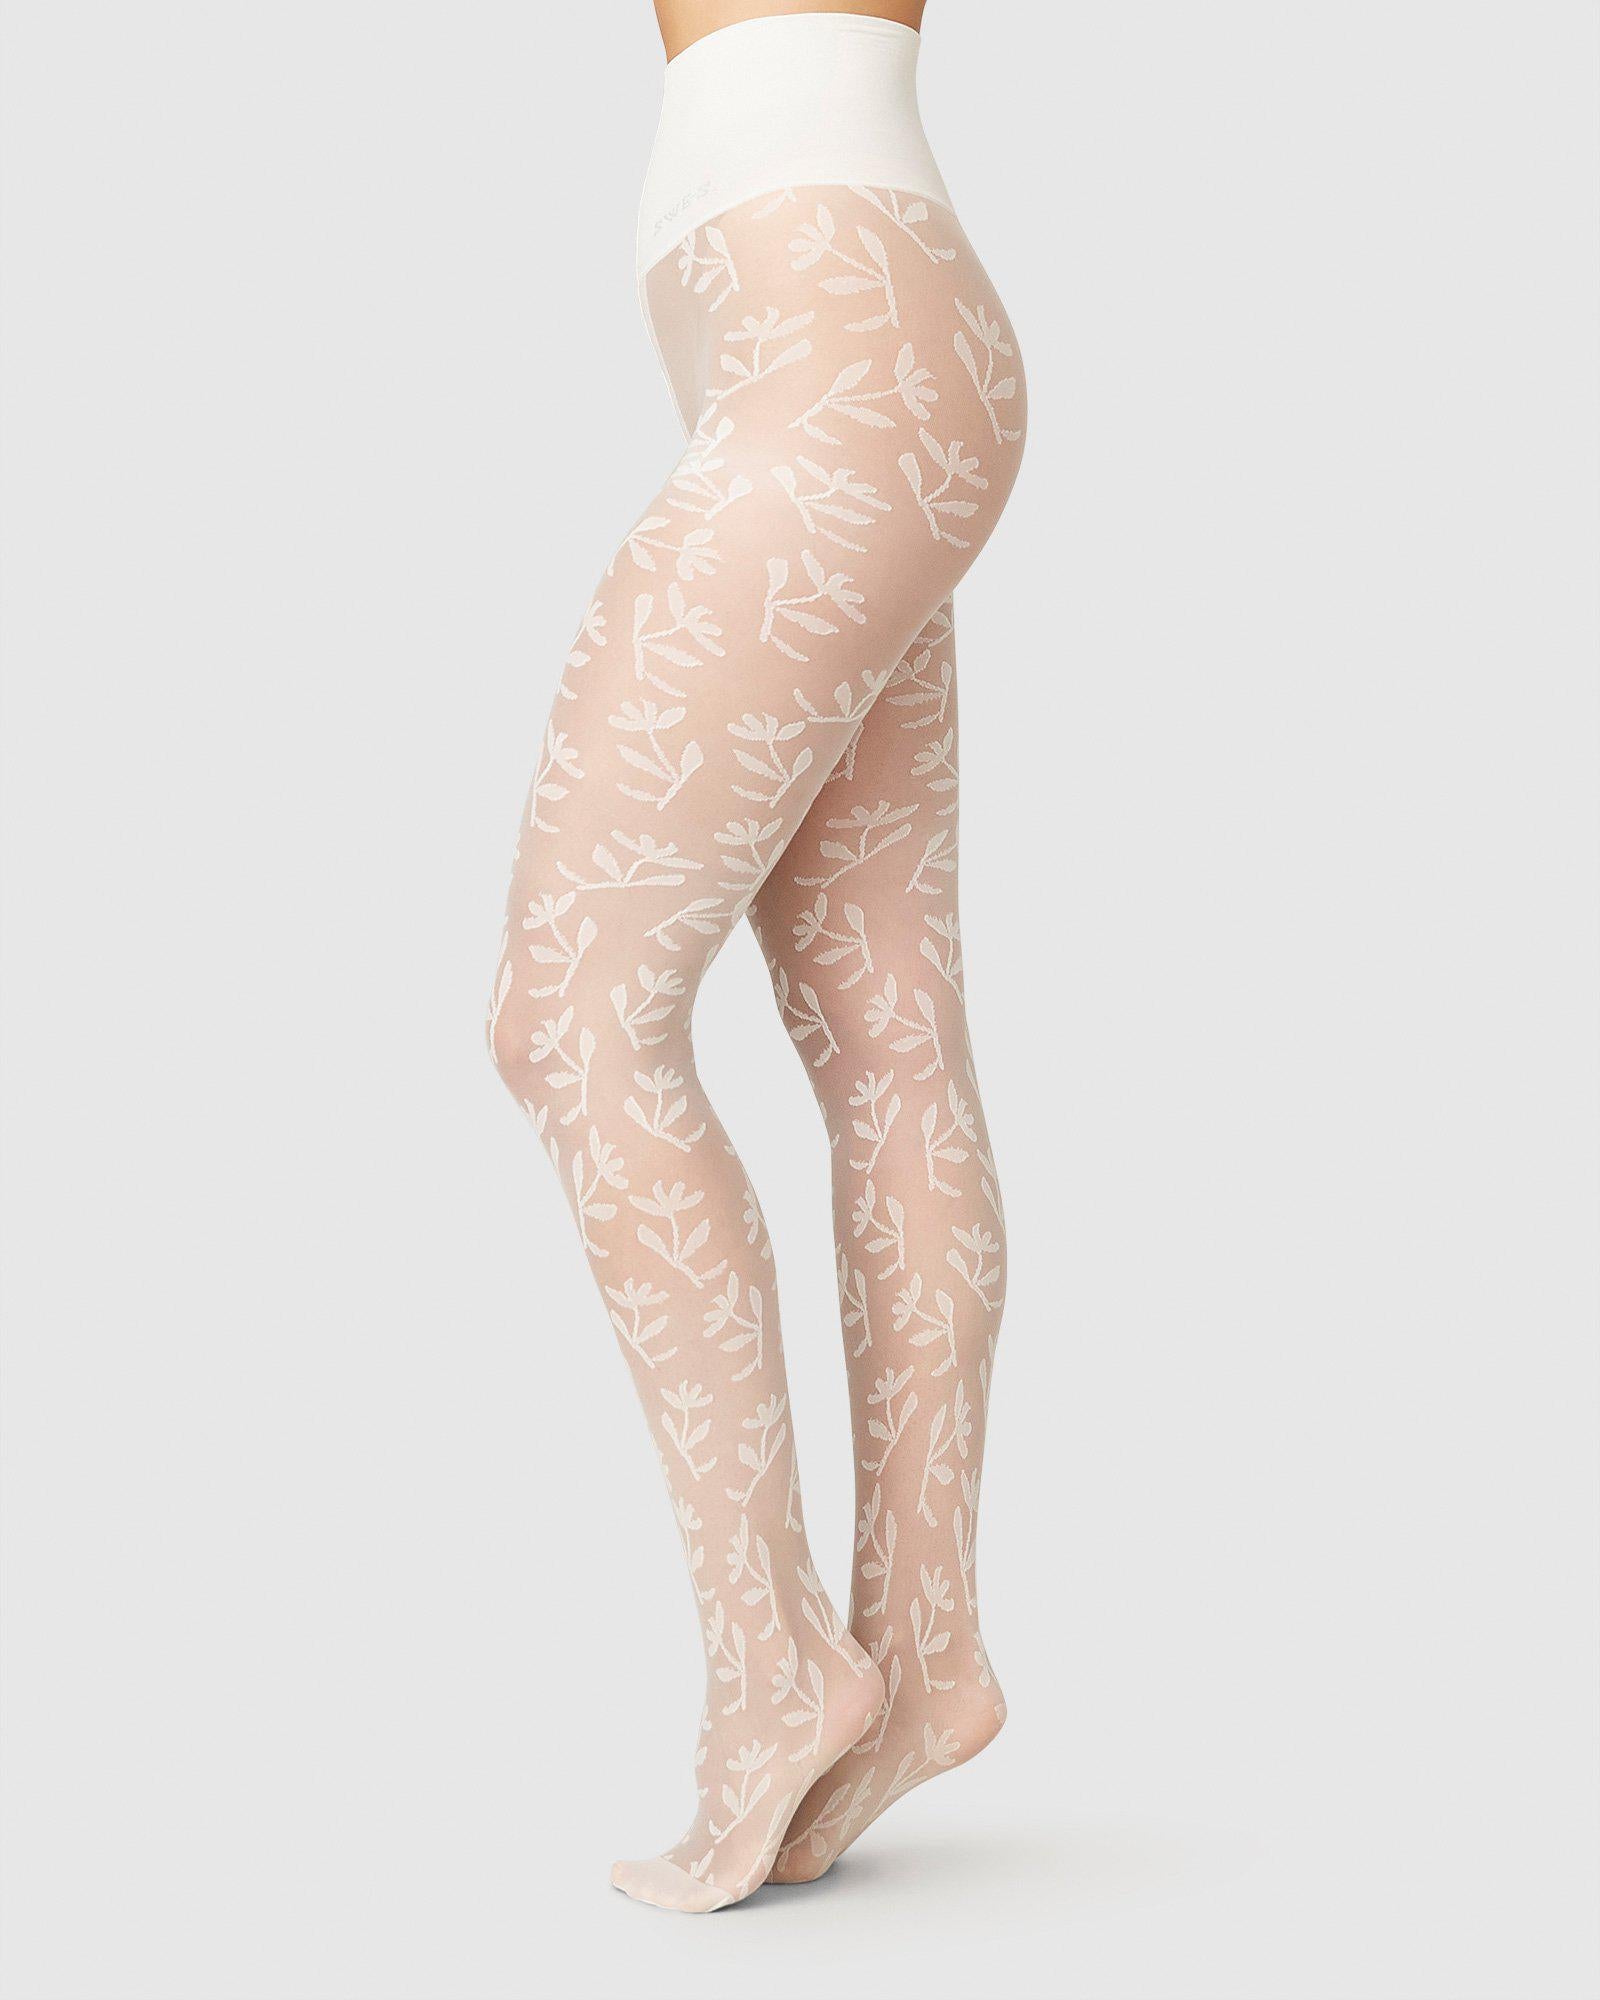 Flora Flower Tights Ivory 40 den | Buy now - Swedish Stockings